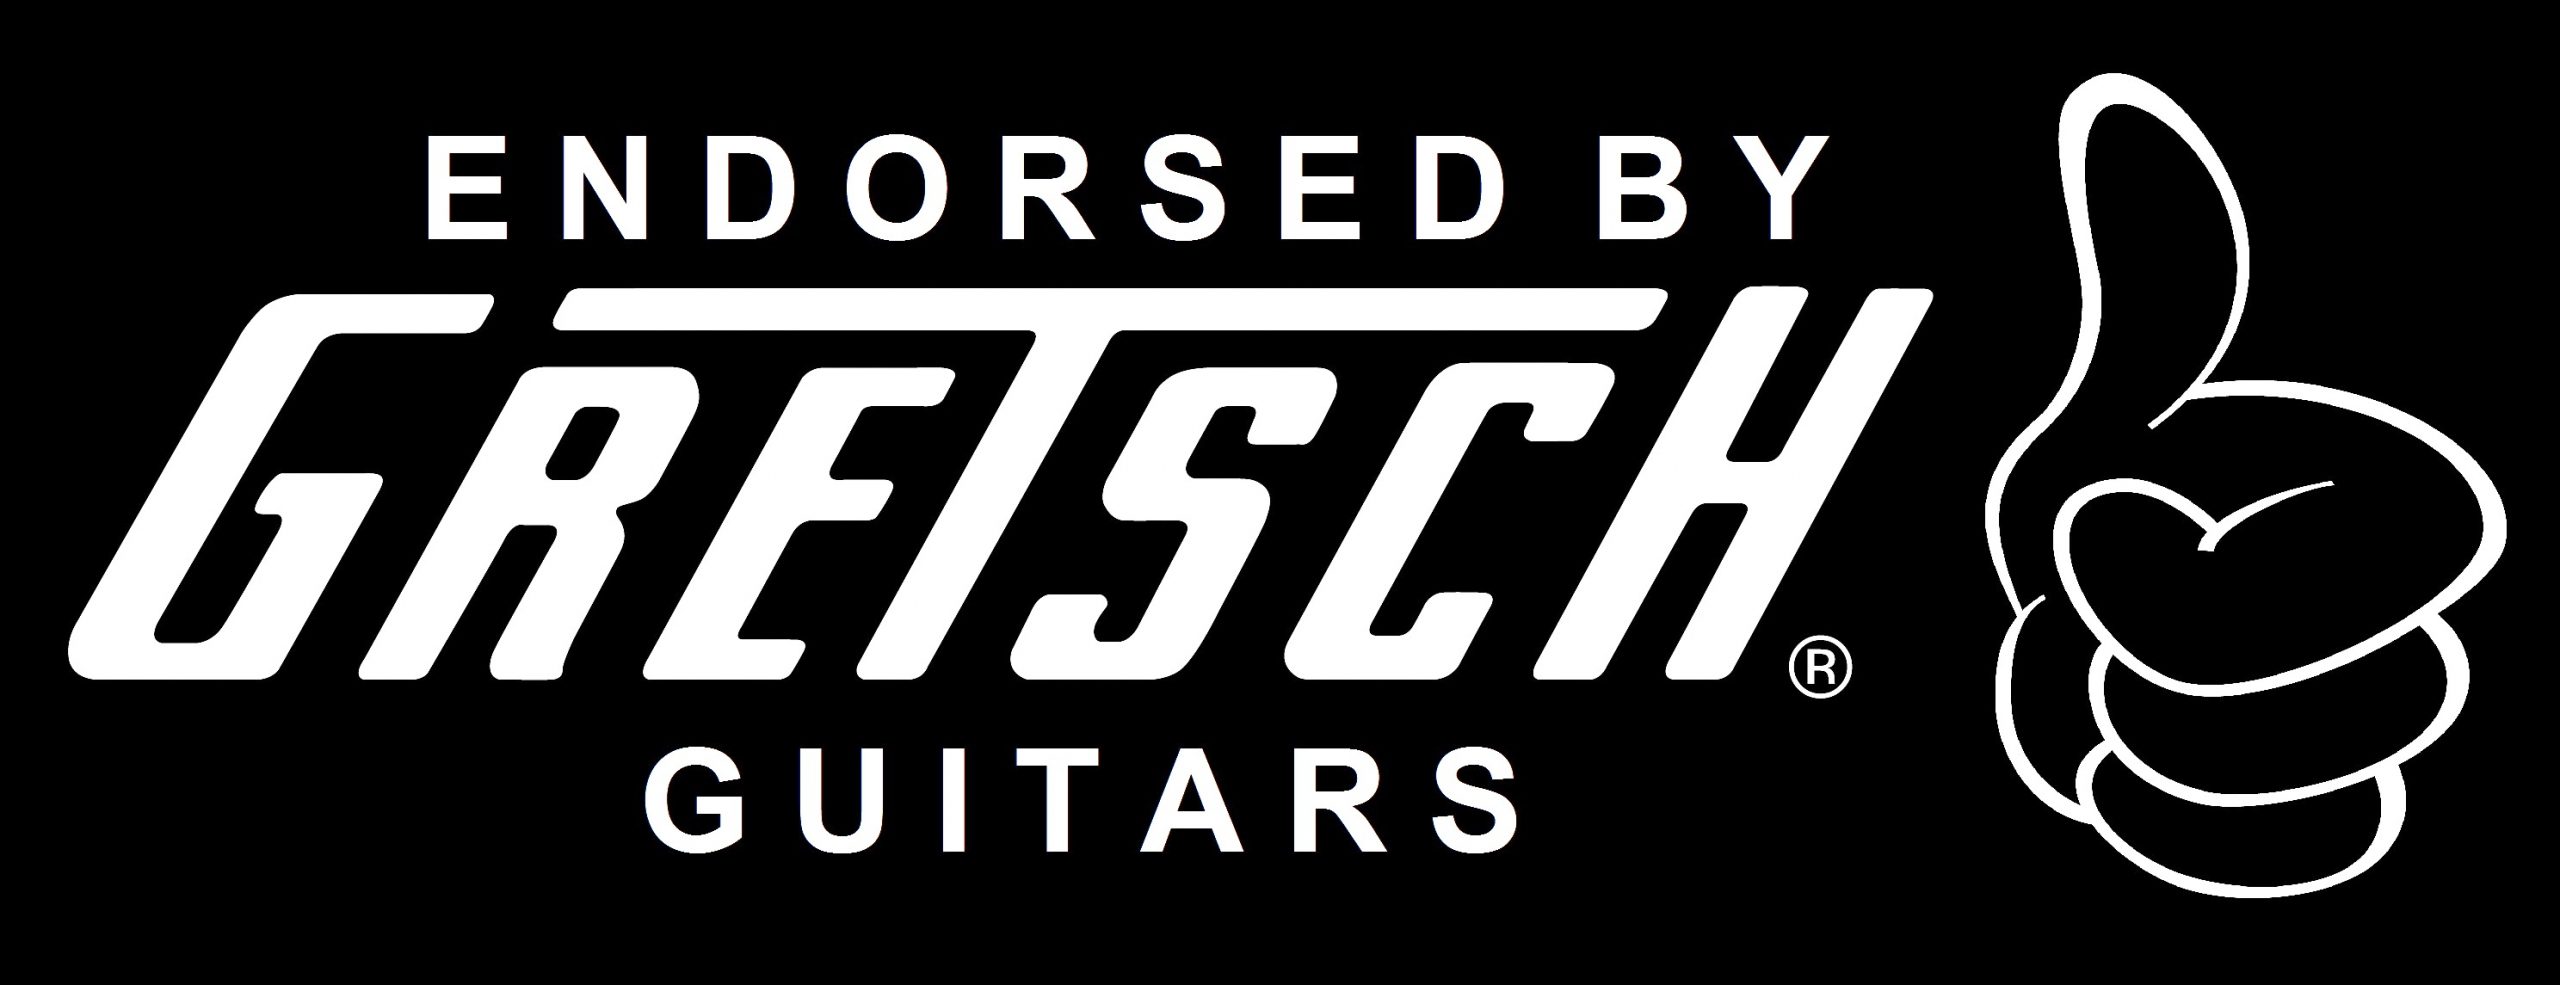 Endorsed by Gretsch